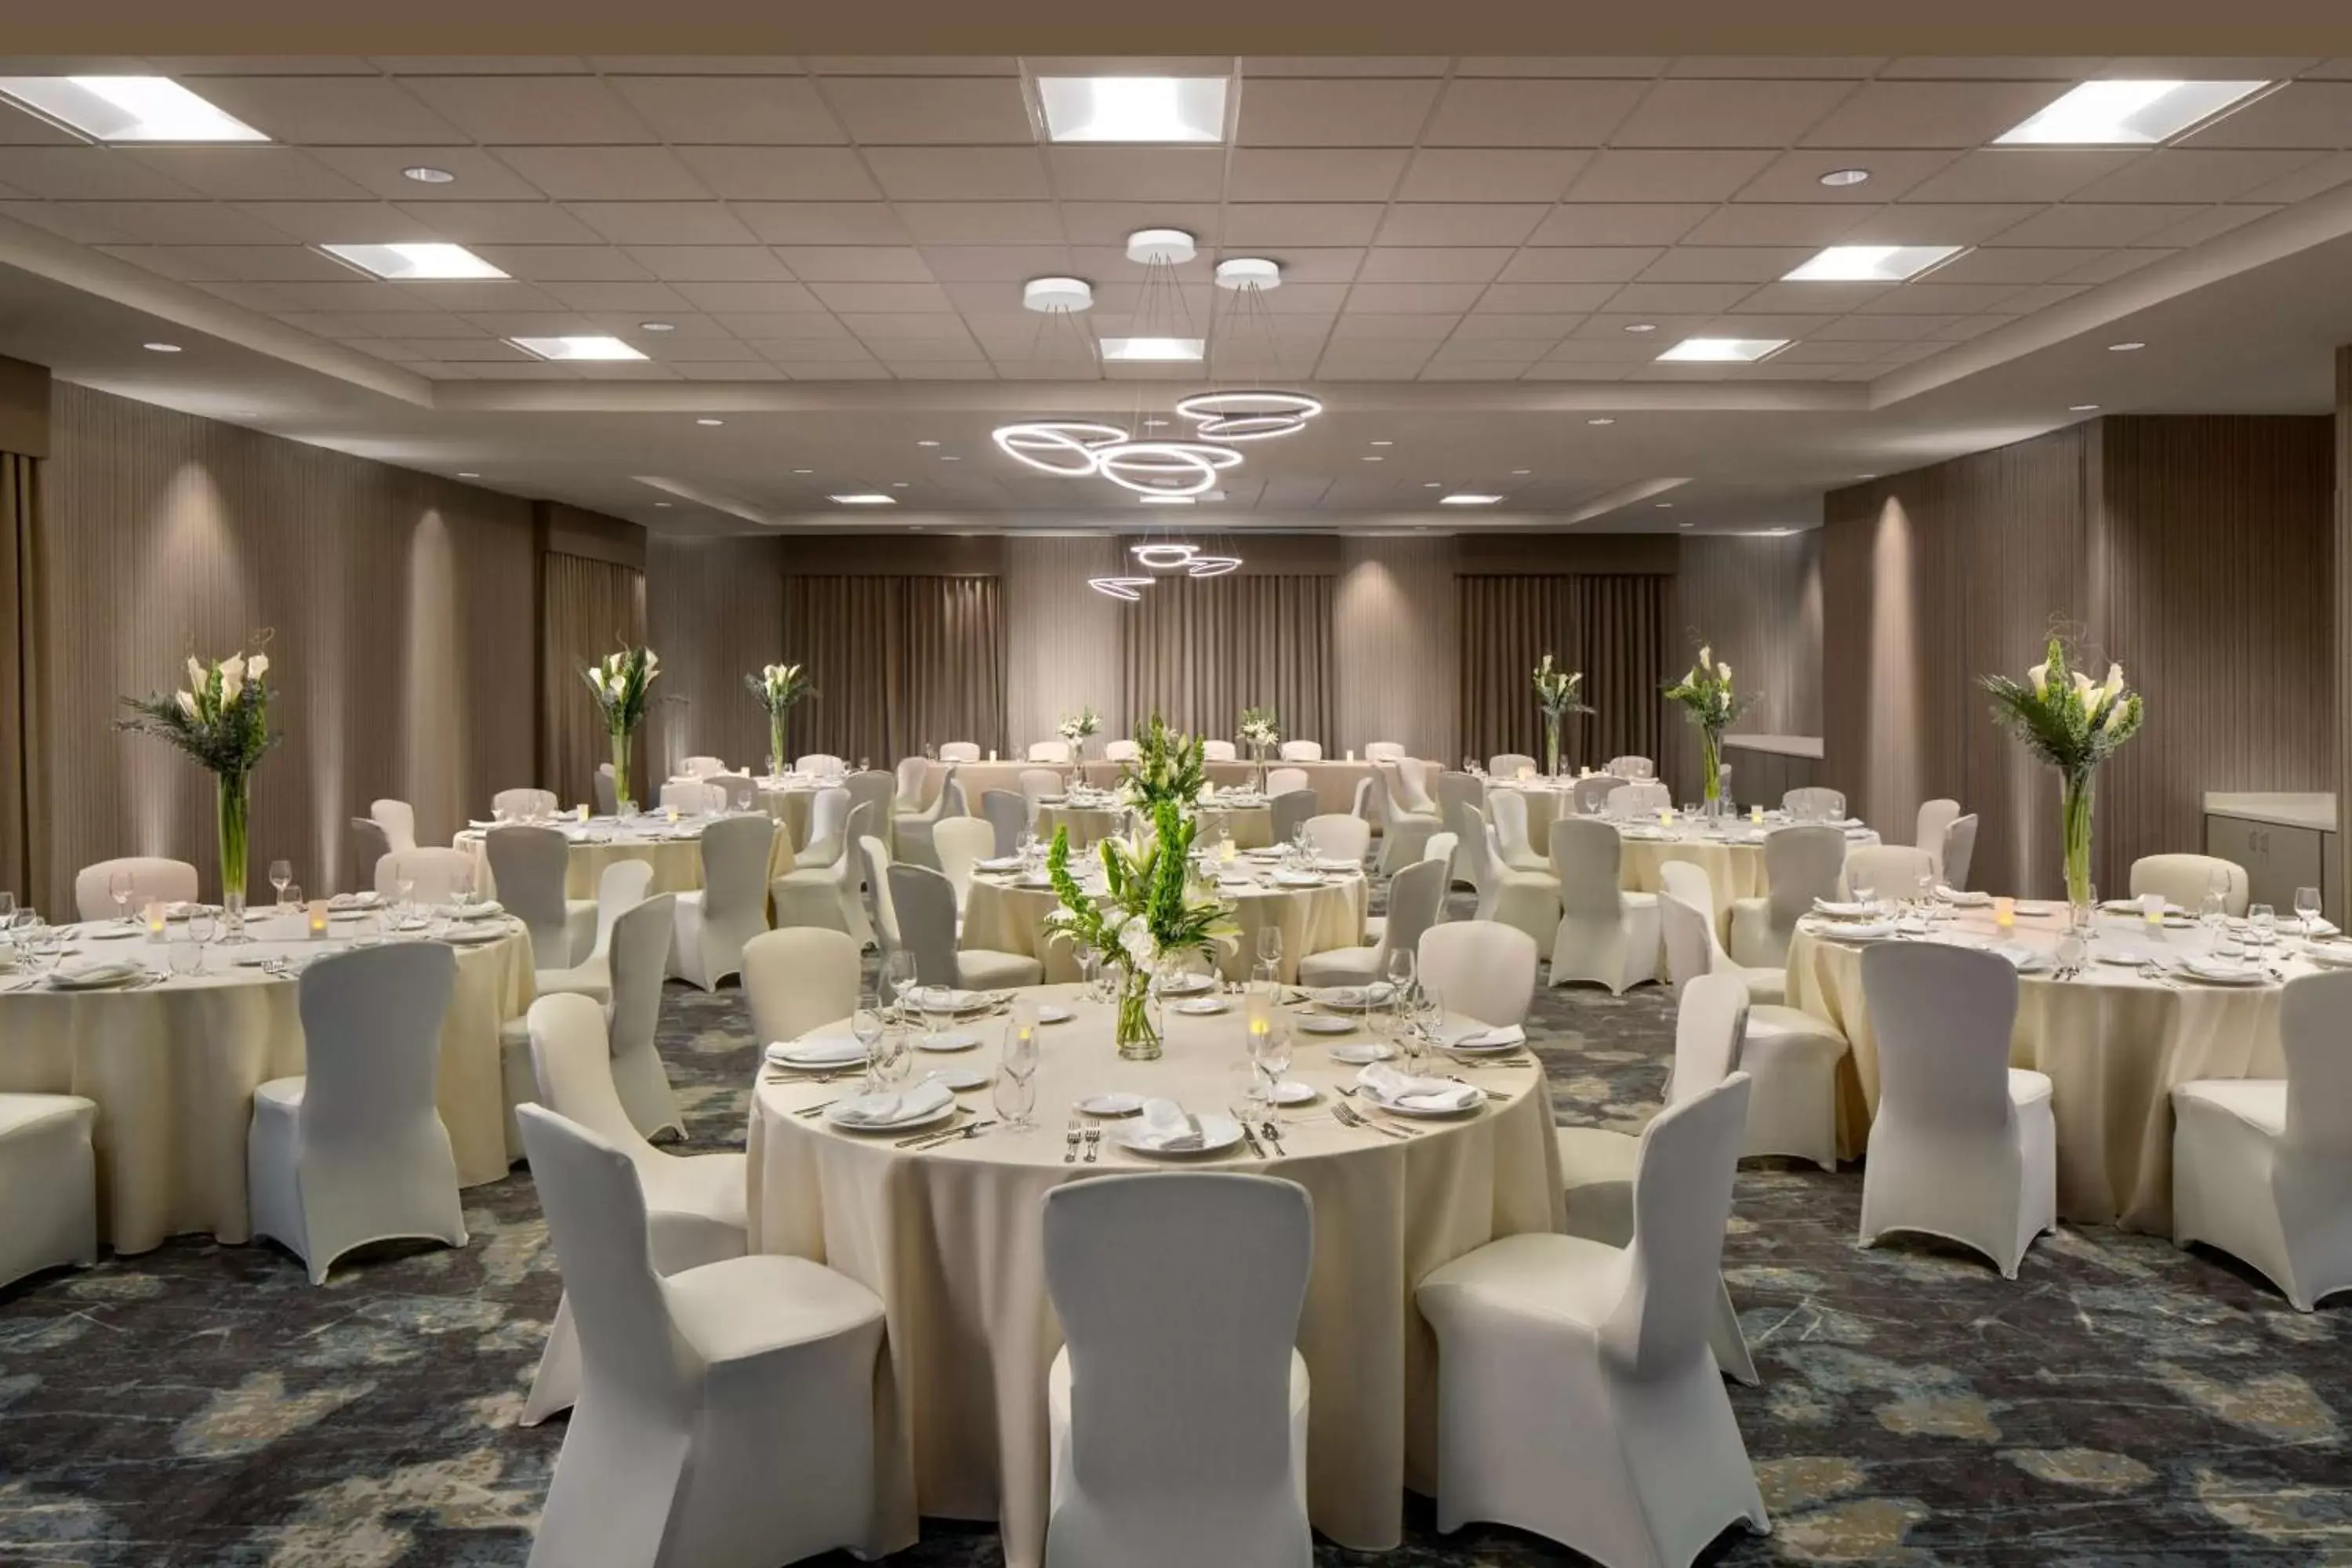 Meeting/conference room, Banquet Facilities in Hilton Garden Inn Lubbock